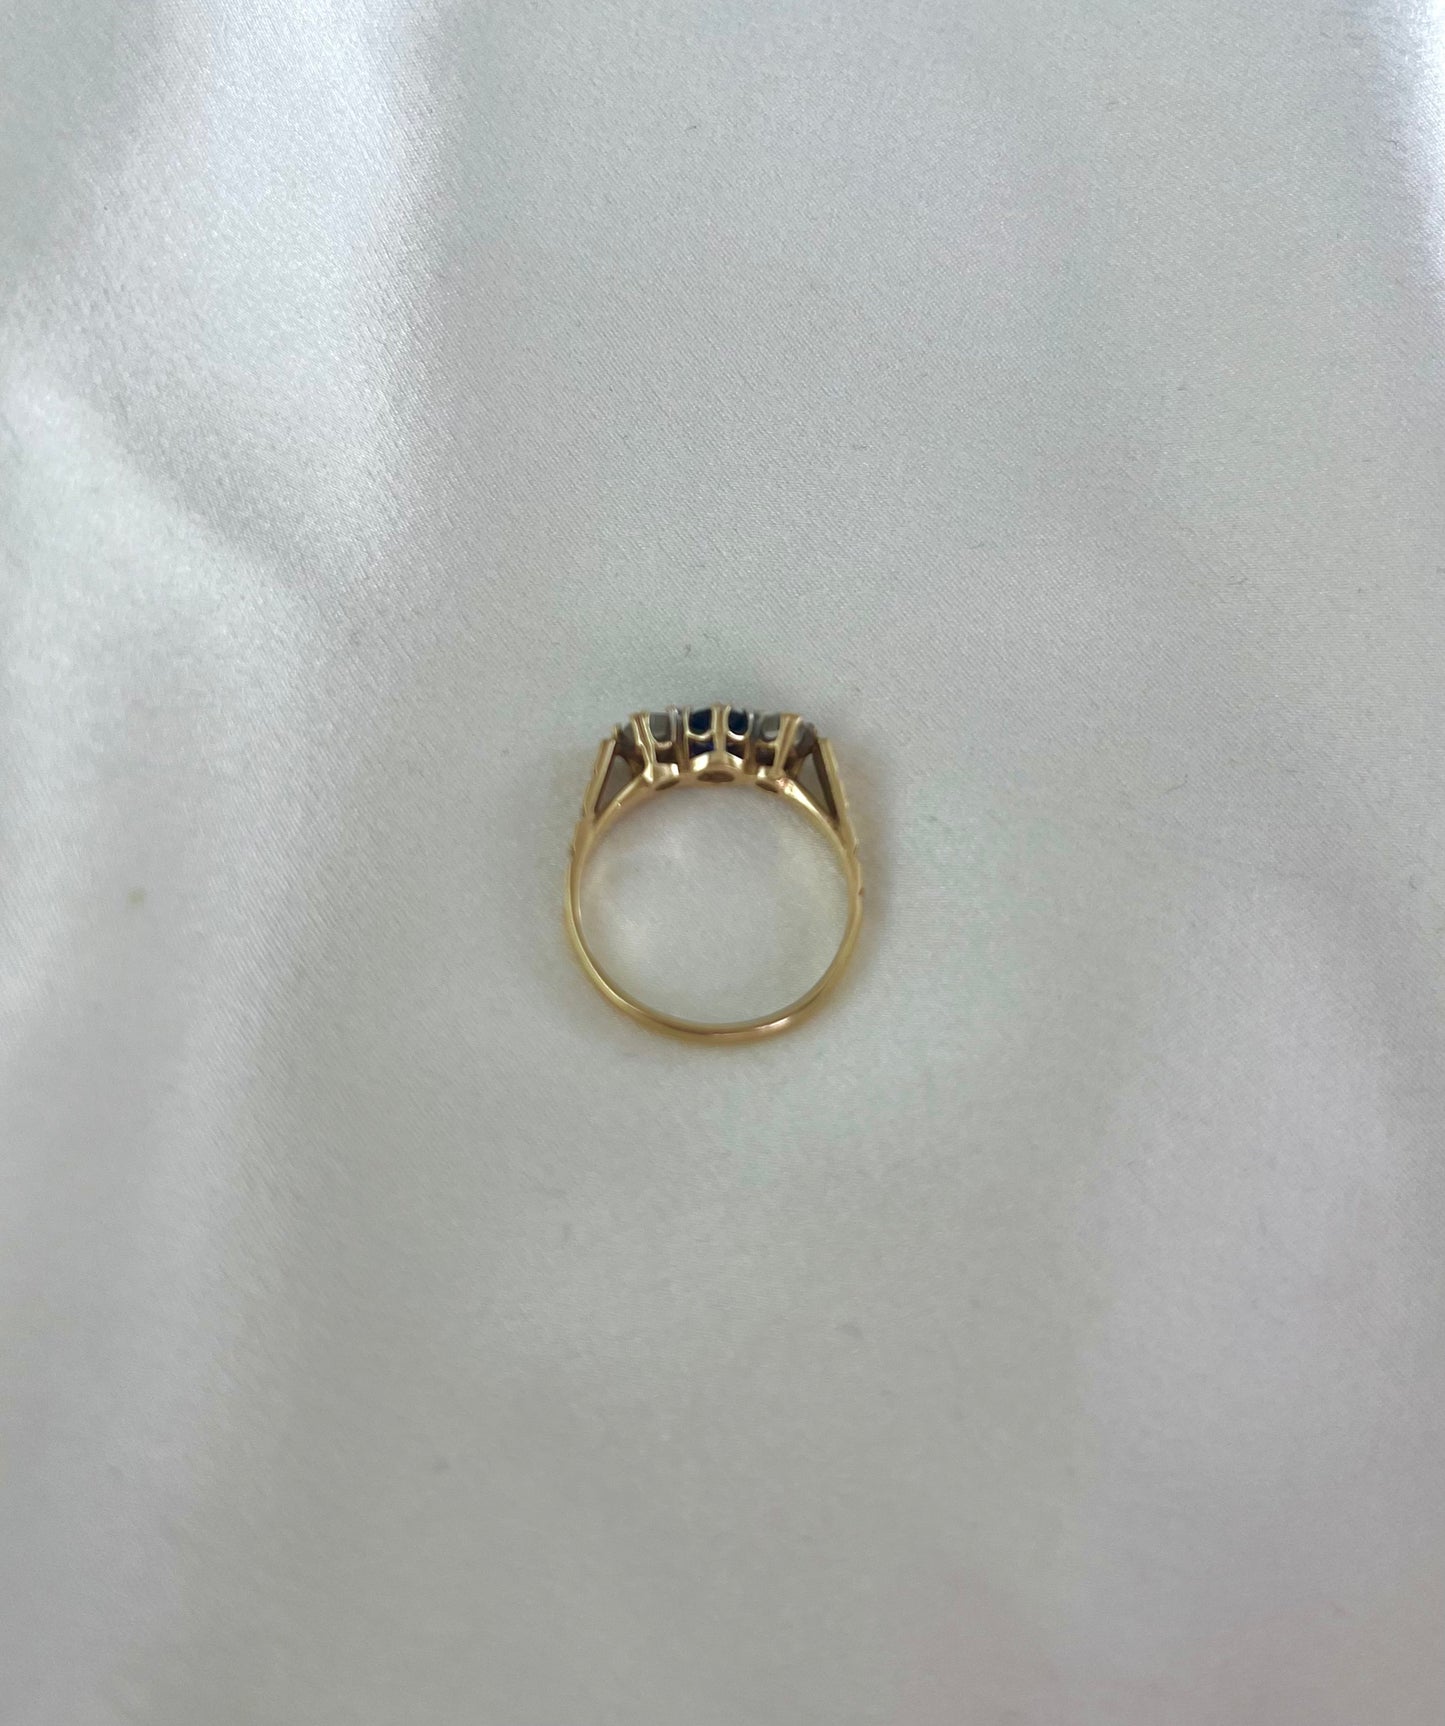 Vintage 9ct Gold Sapphire Paste 3 Stone Ring, Size M UK 1970s